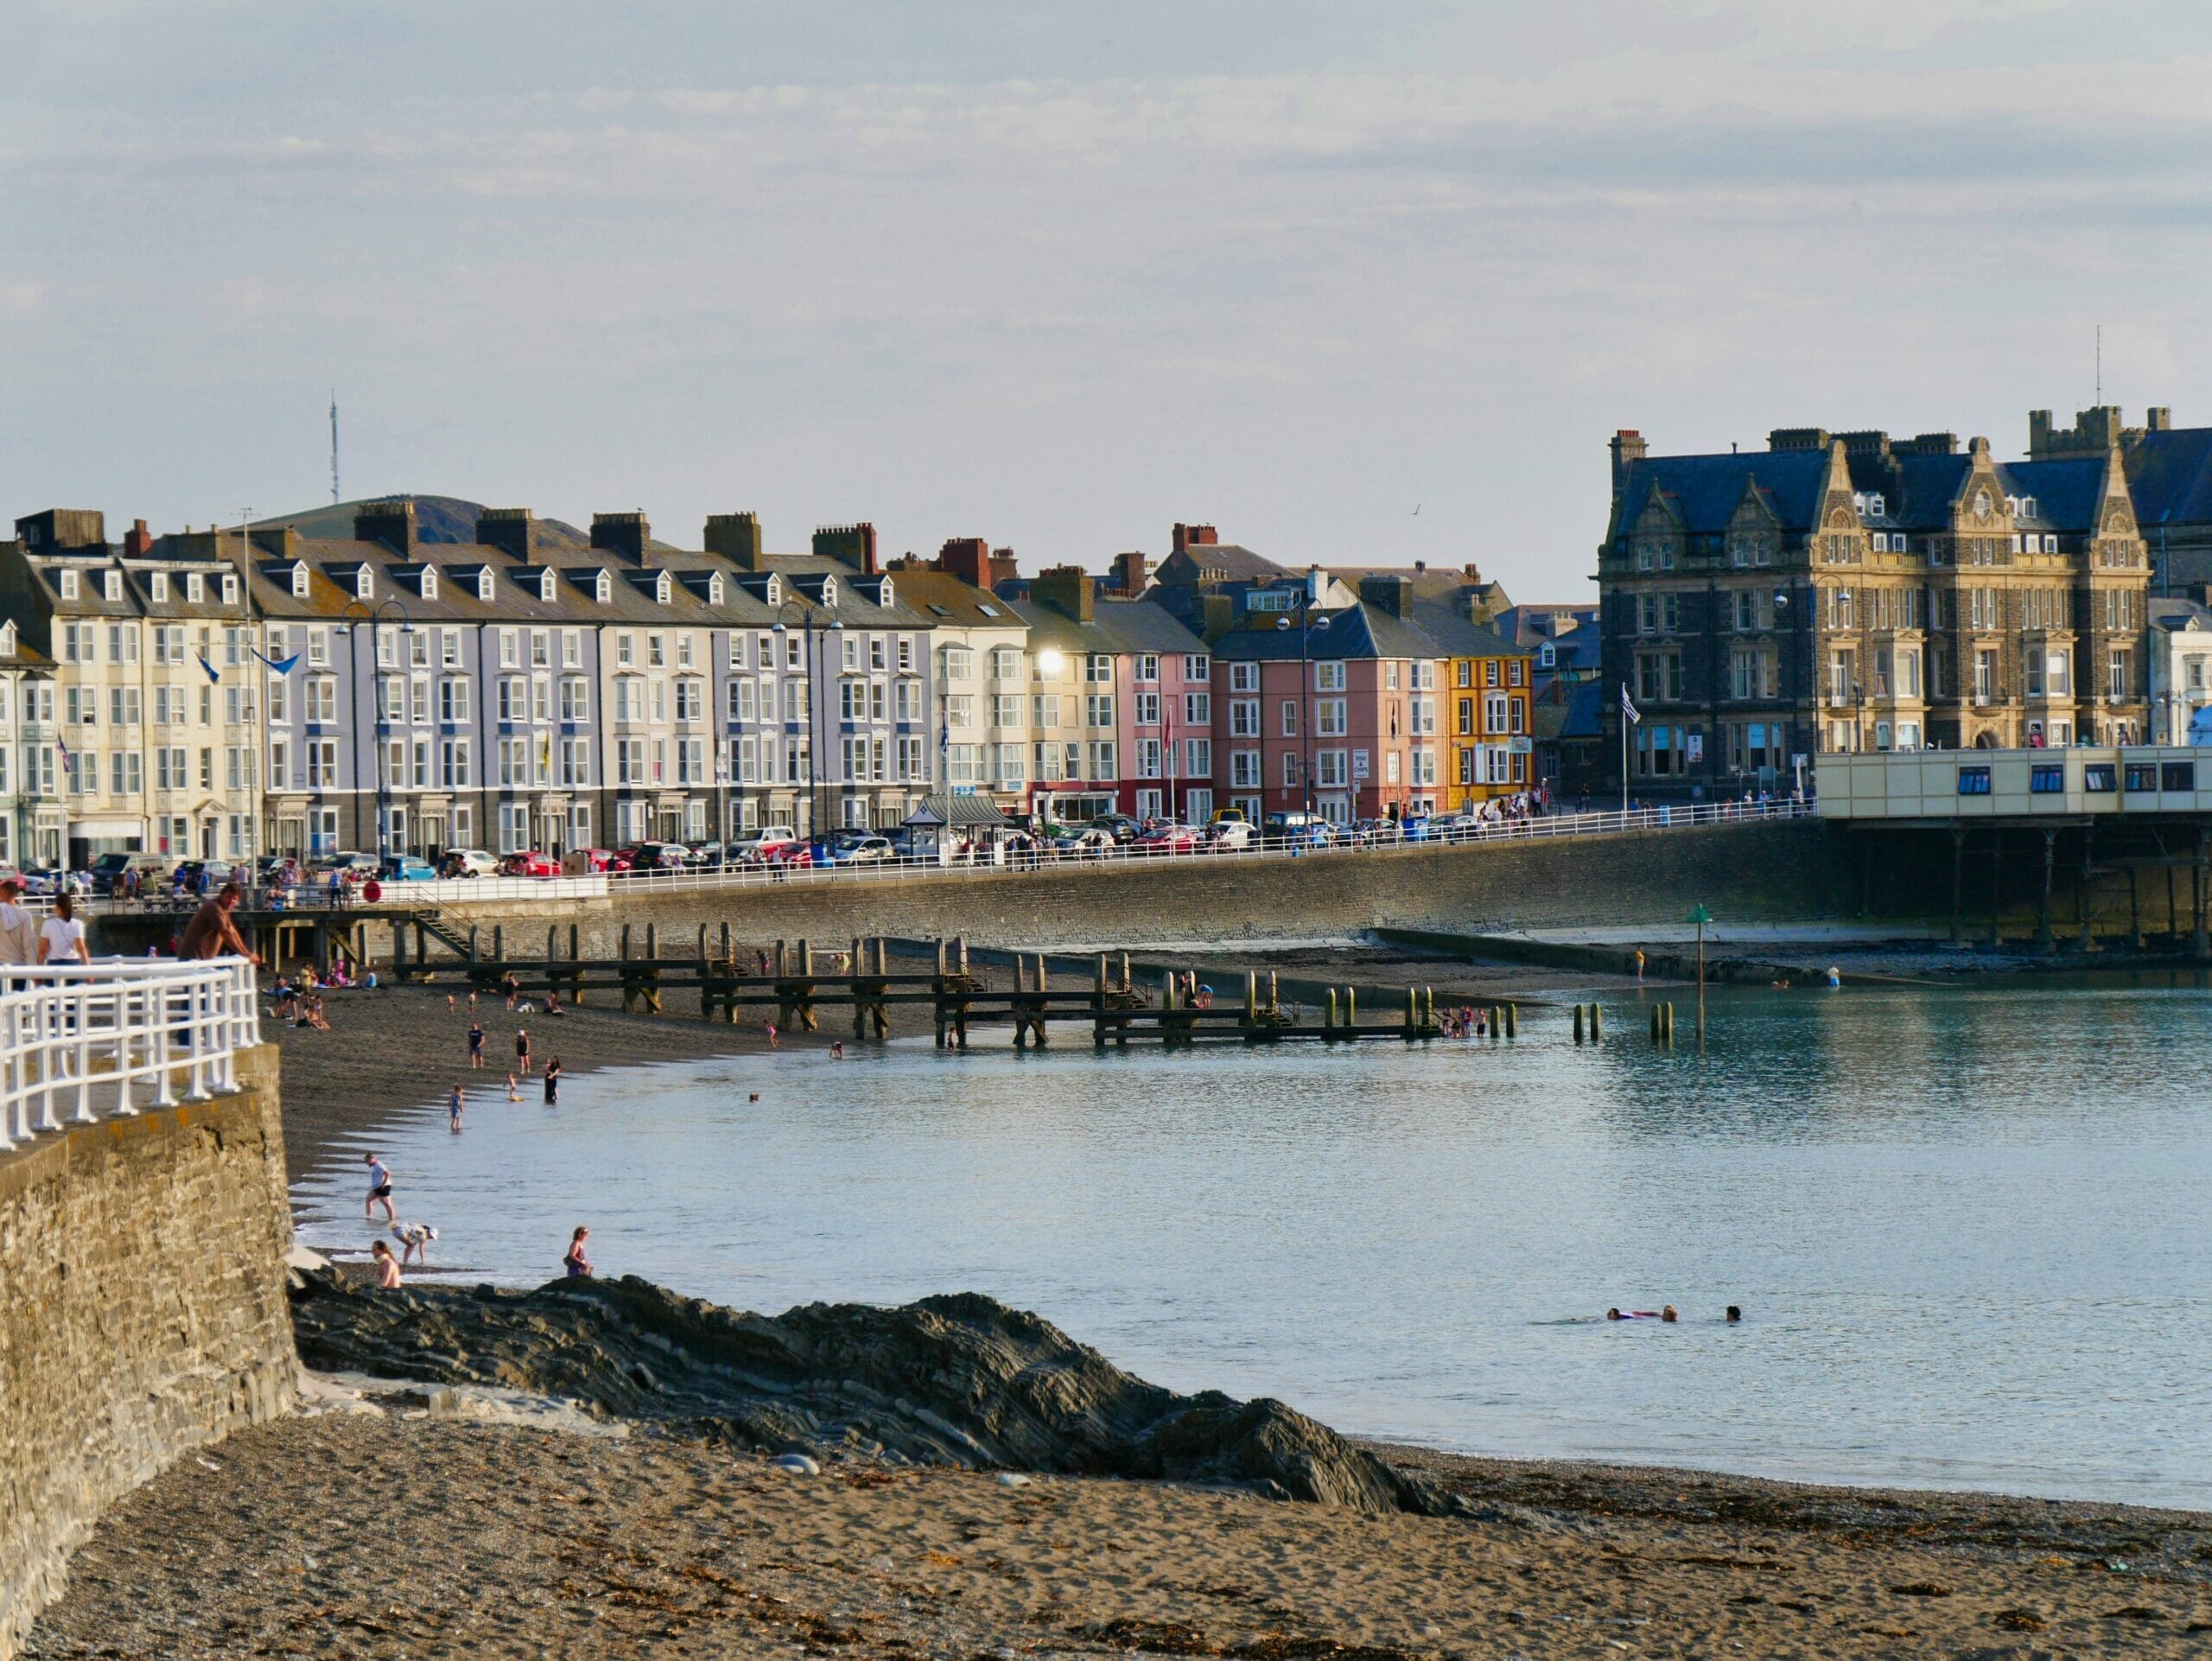 Buildings along the sea front in Aberystwyth, Wales